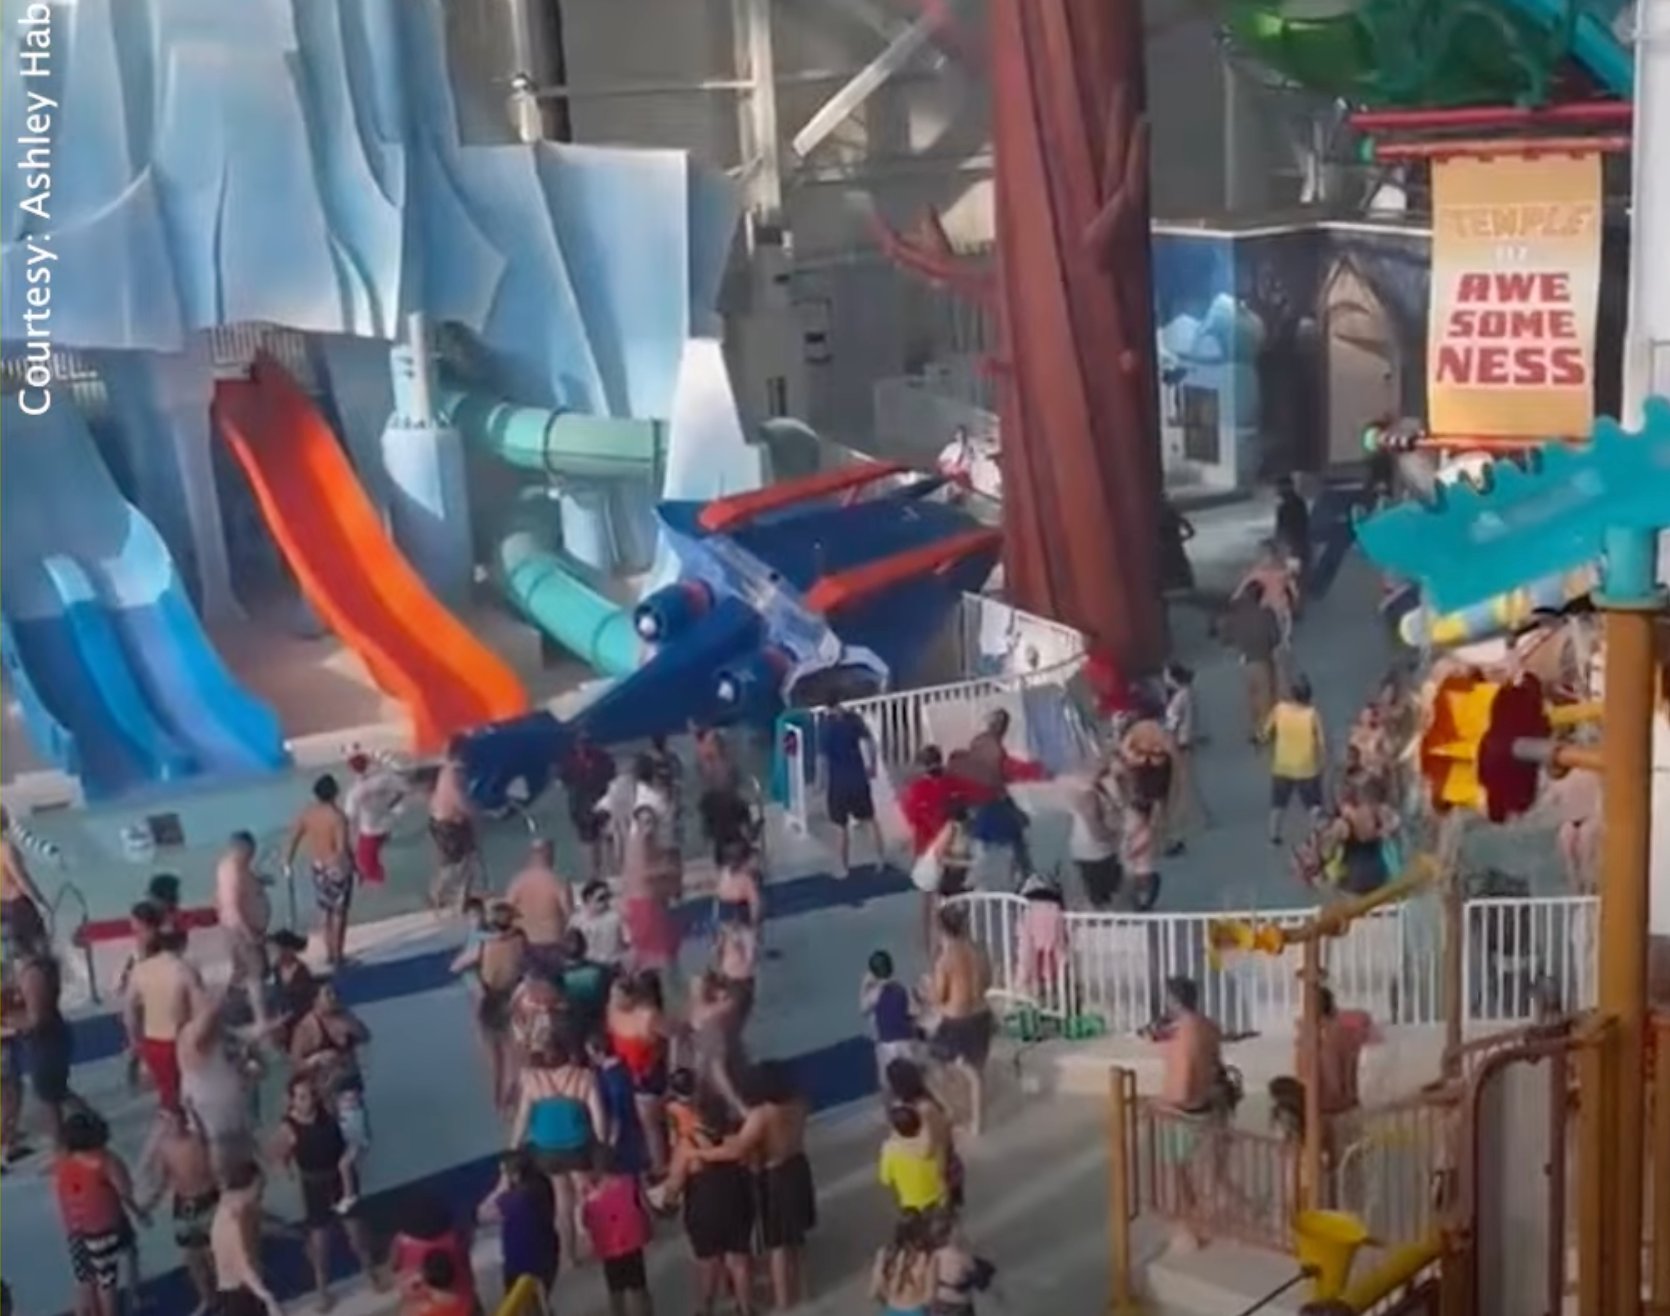 A large blue prop helicopter fell into a pool at the American Dream water park in New Jersey on Sunday